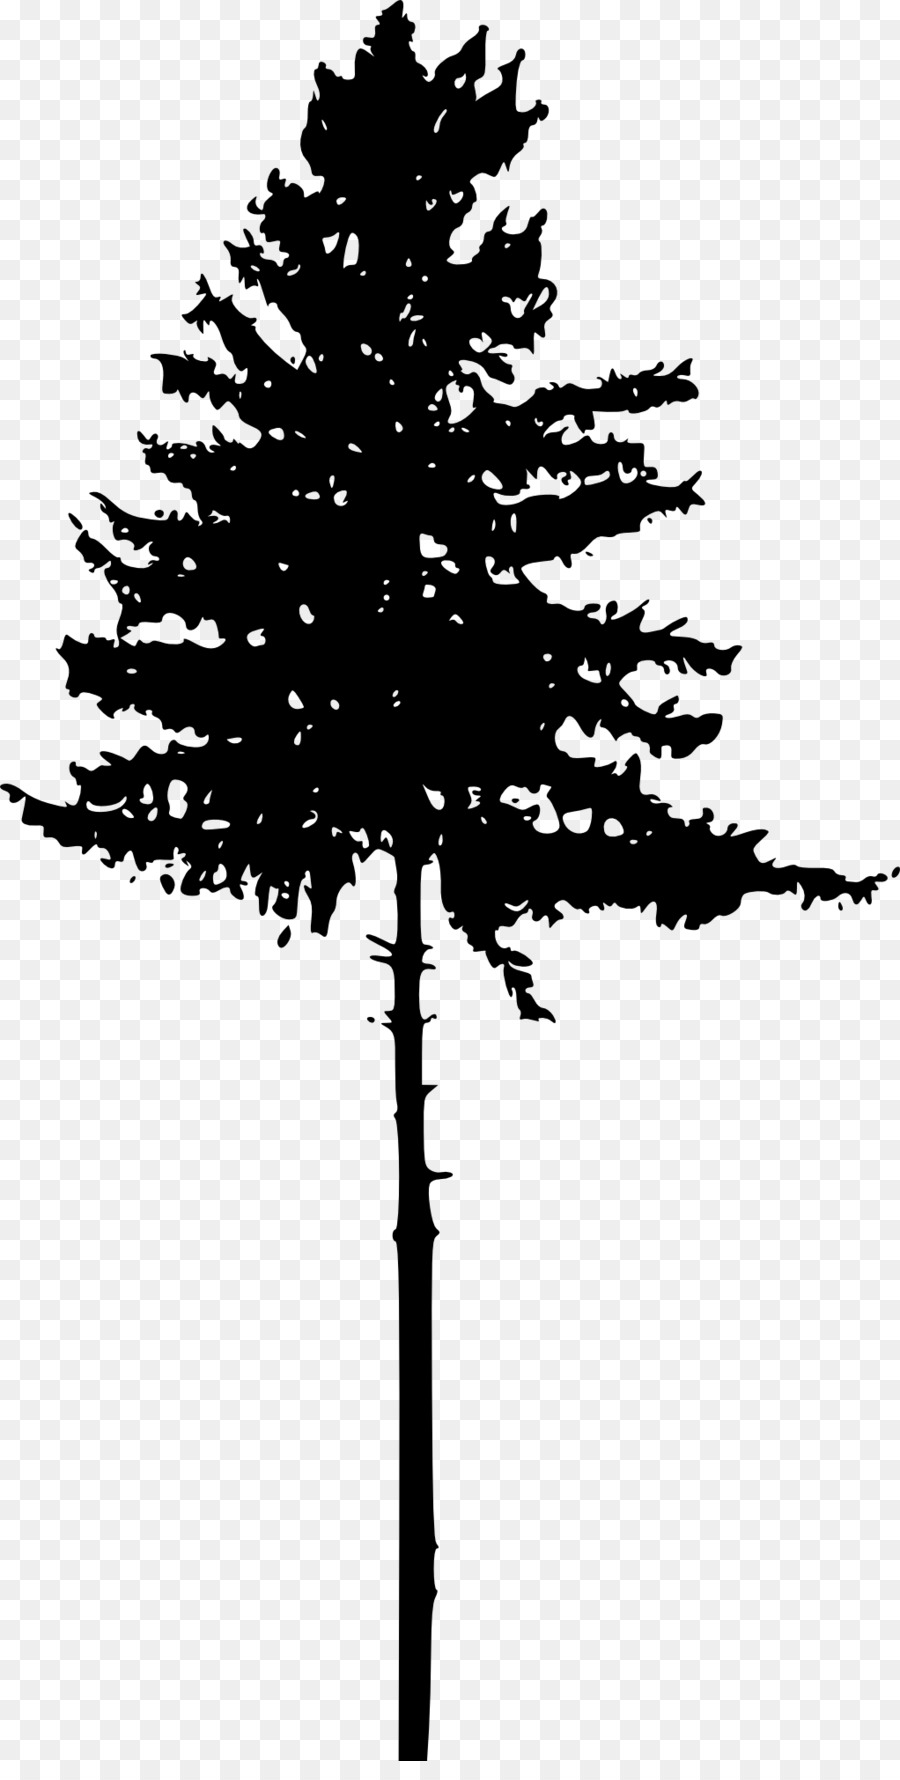 Tree Pine Silhouette Clip art - pine tree png download - 1022*2000 - Free Transparent Tree png Download.